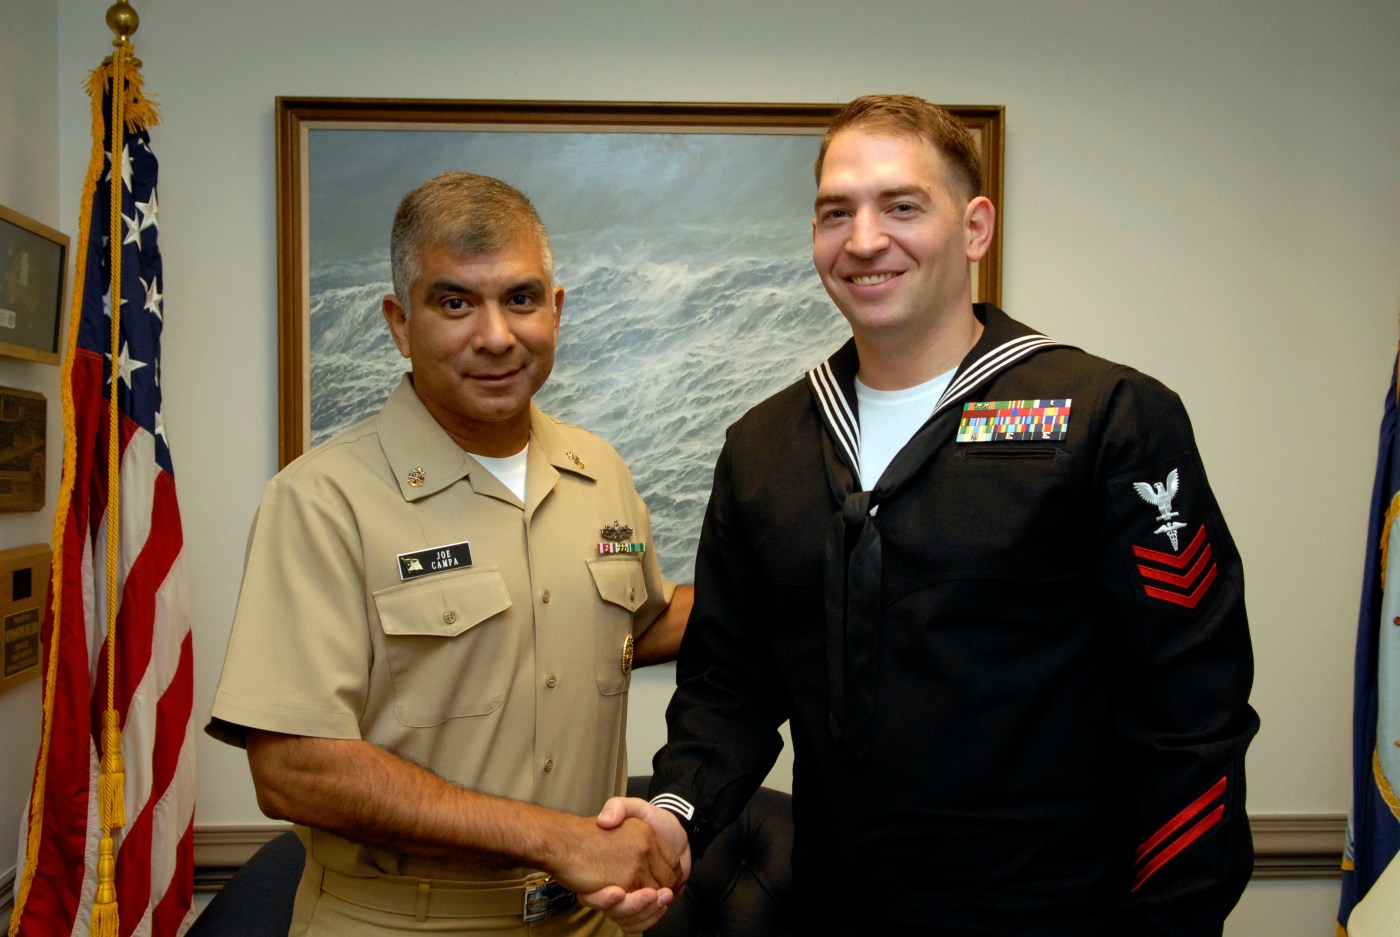 Navy Hospital Corpsman Lee Becker (right) with Master Chief Petty Officer of the Navy Joe Campa at the Pentagon in 2007.